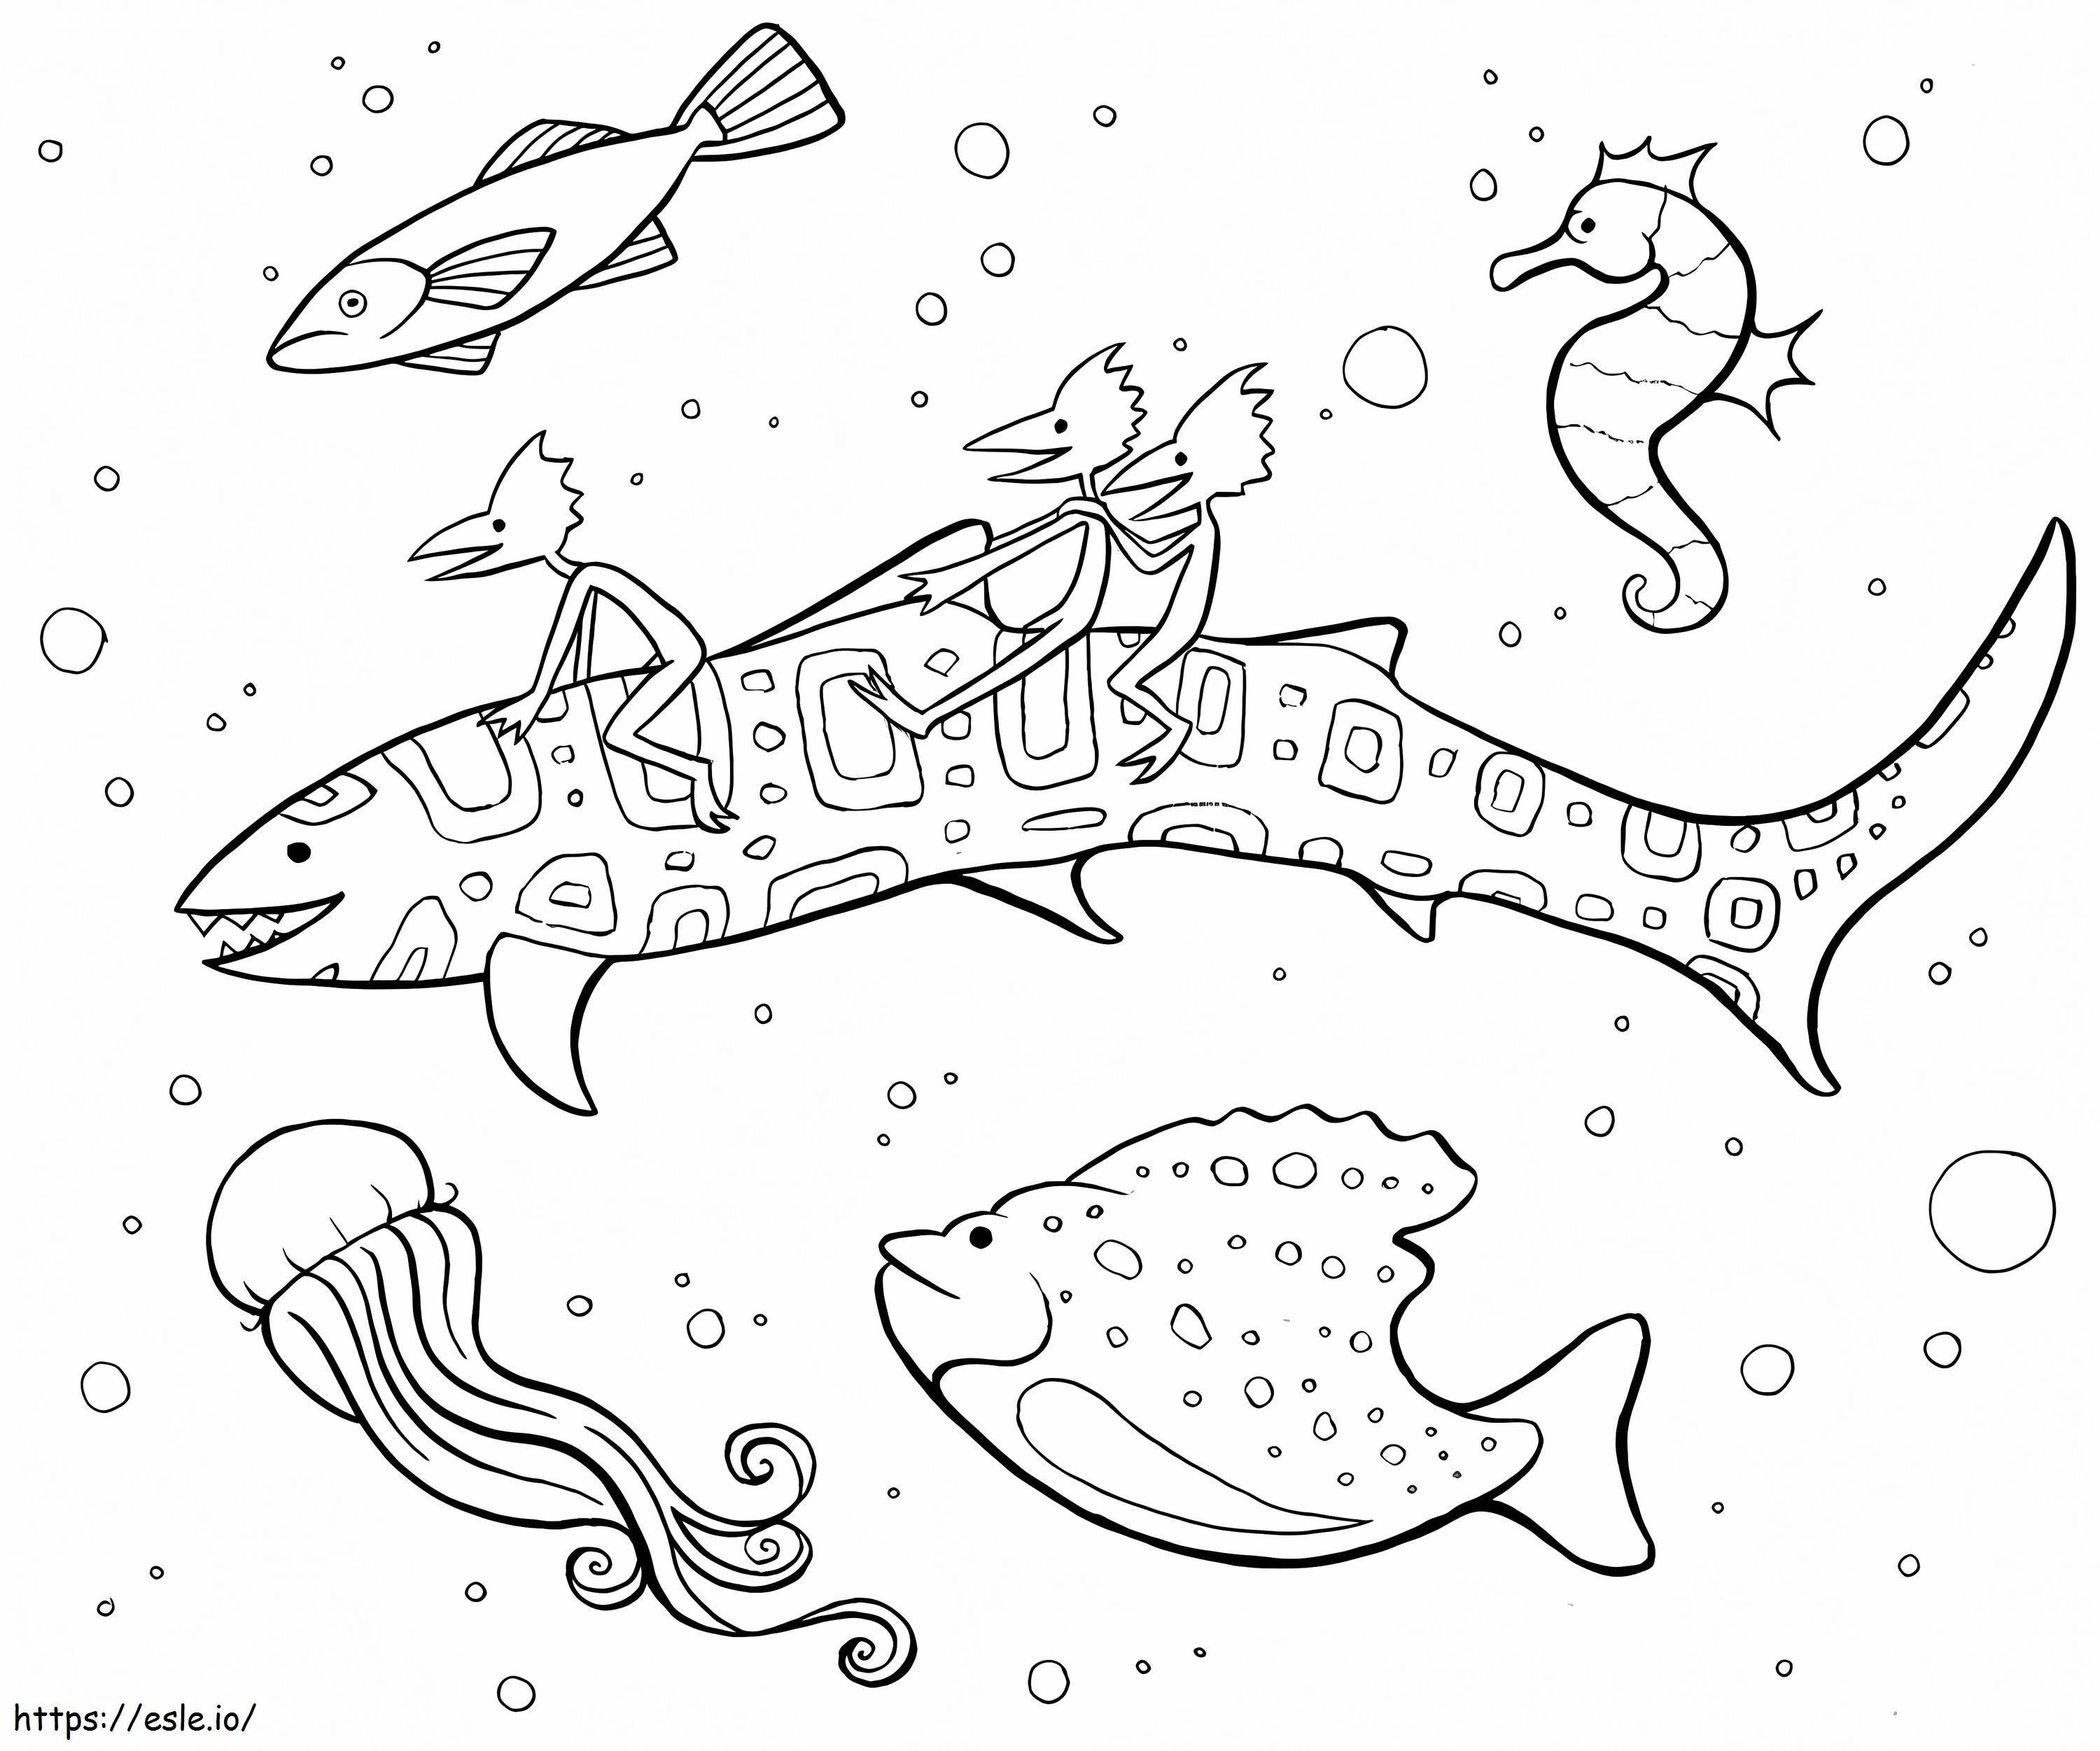 Ocean Animals Mindfulness coloring page